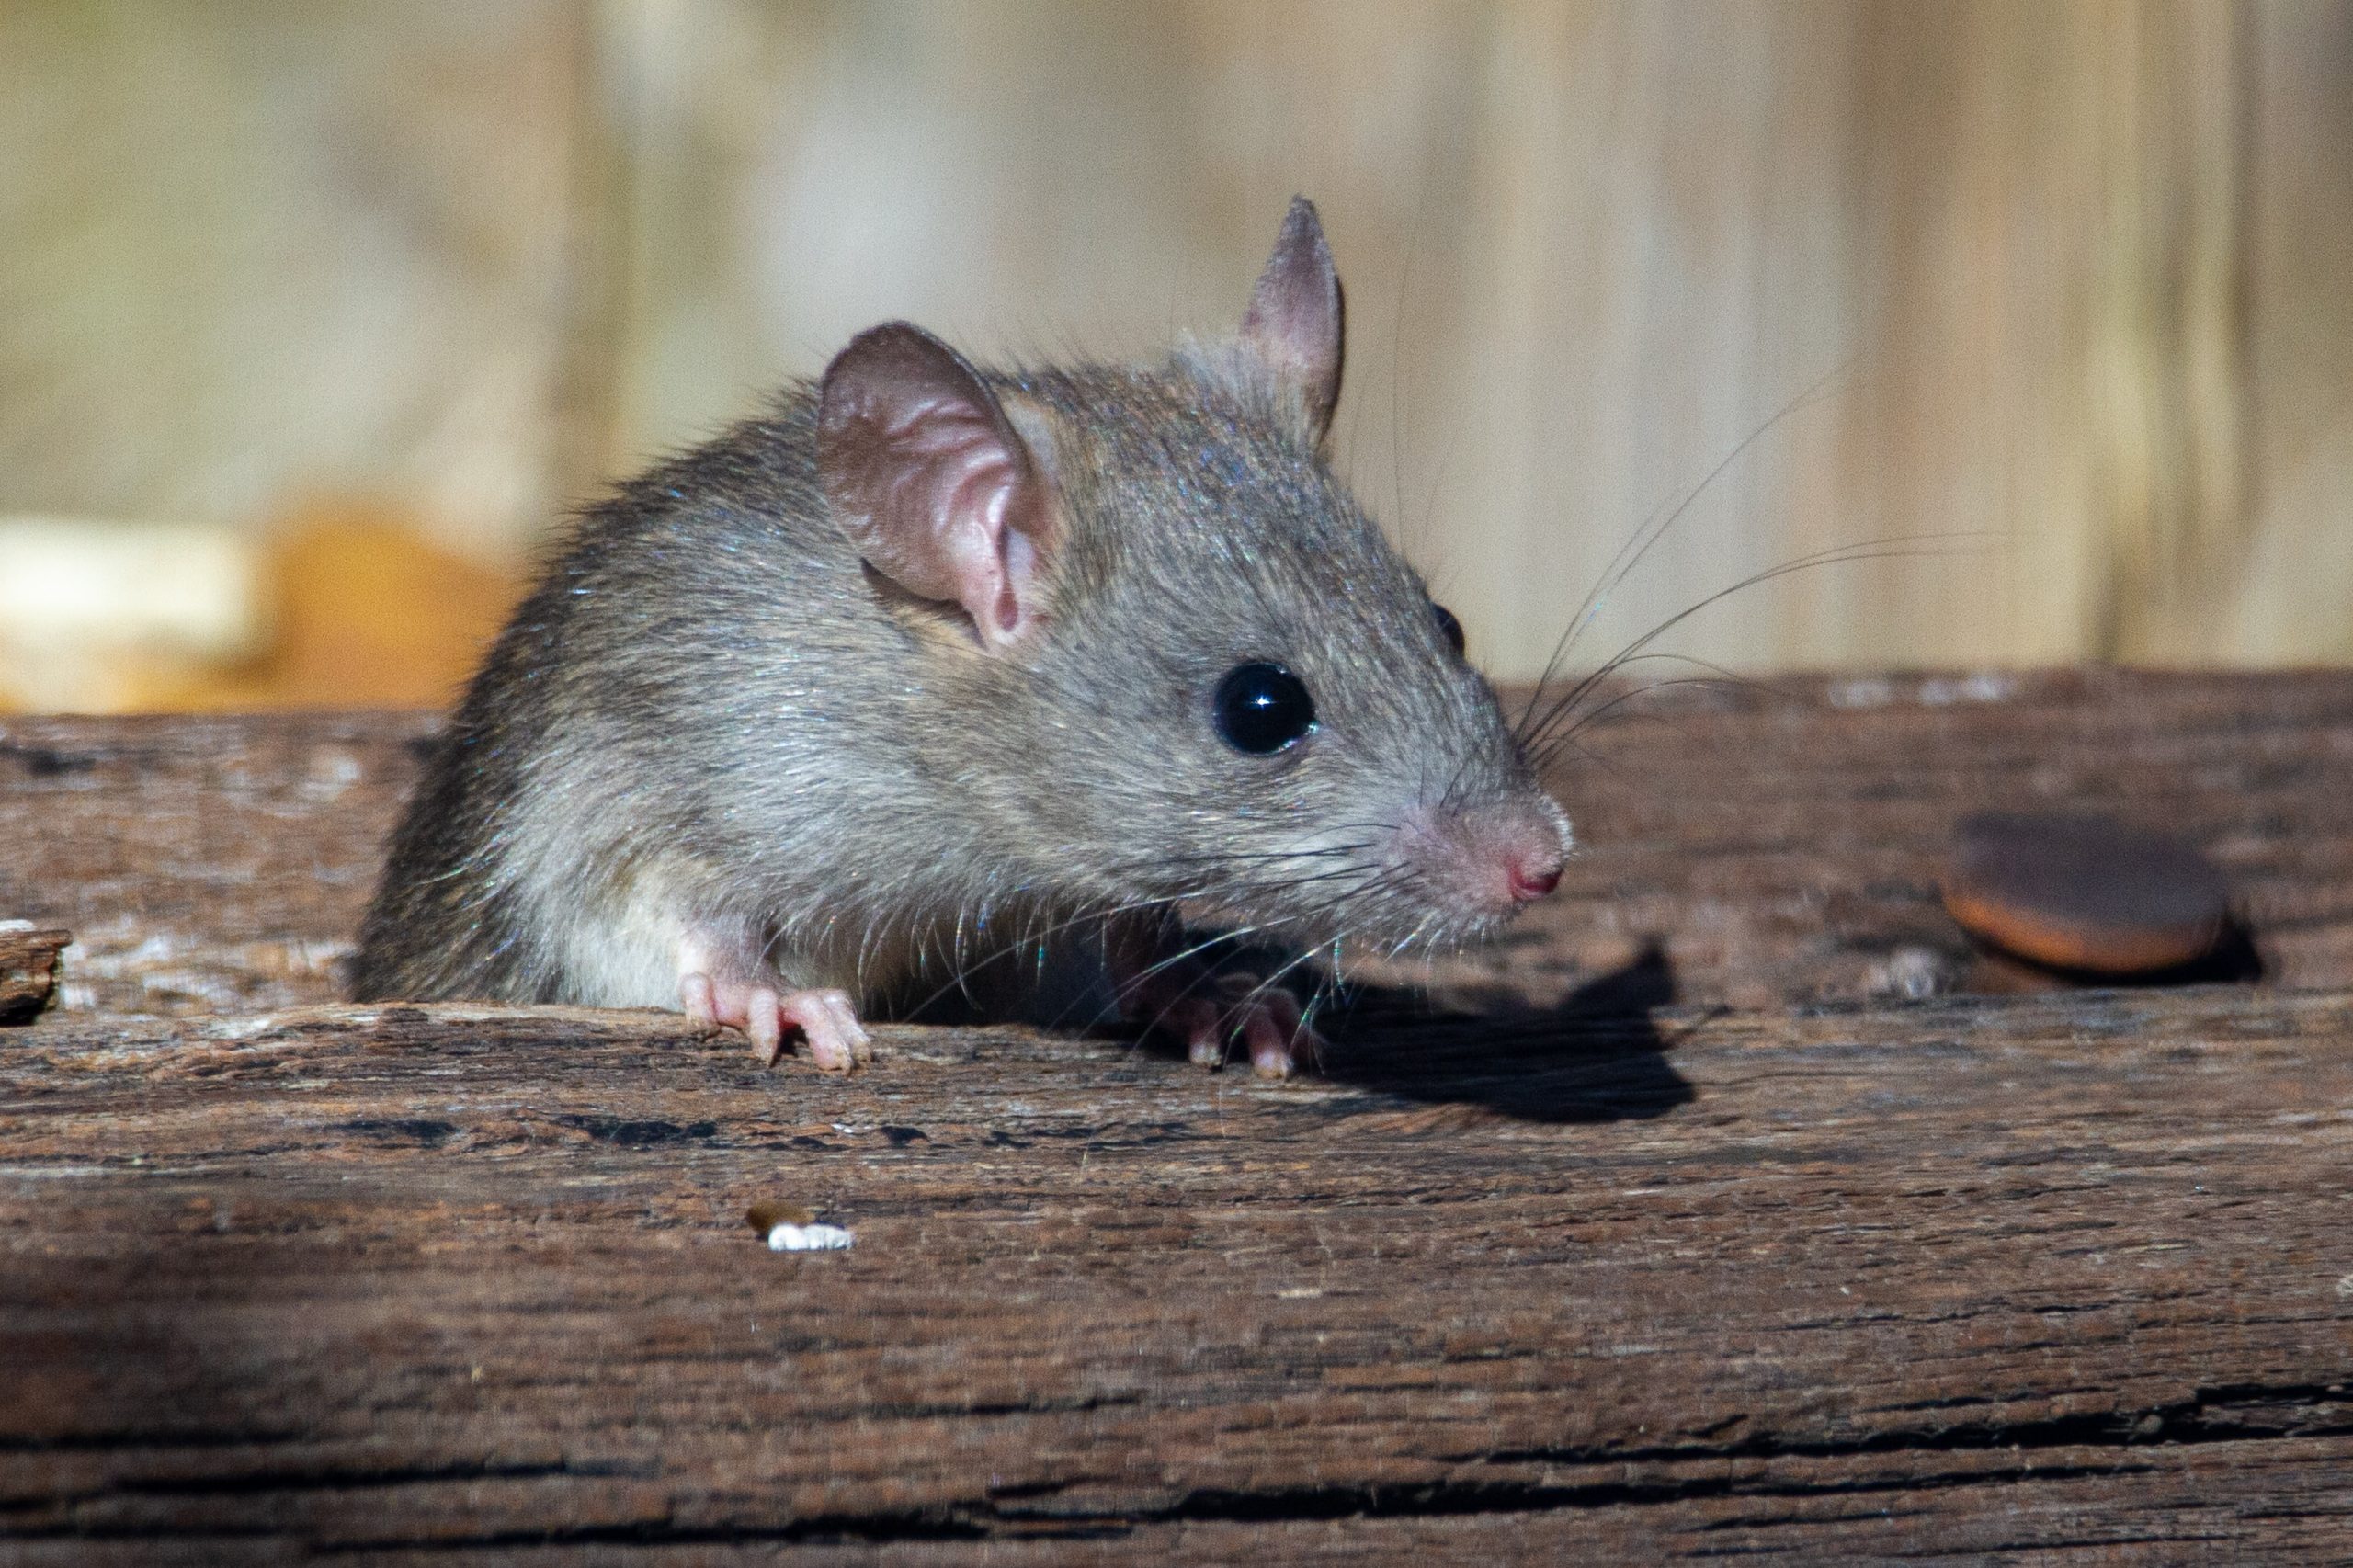 The Jasin and Sandakan city councils are offering cash rewards to anyone who brings in rats, dead or alive. Image credit: Joshua J. Cotten on Unsplash